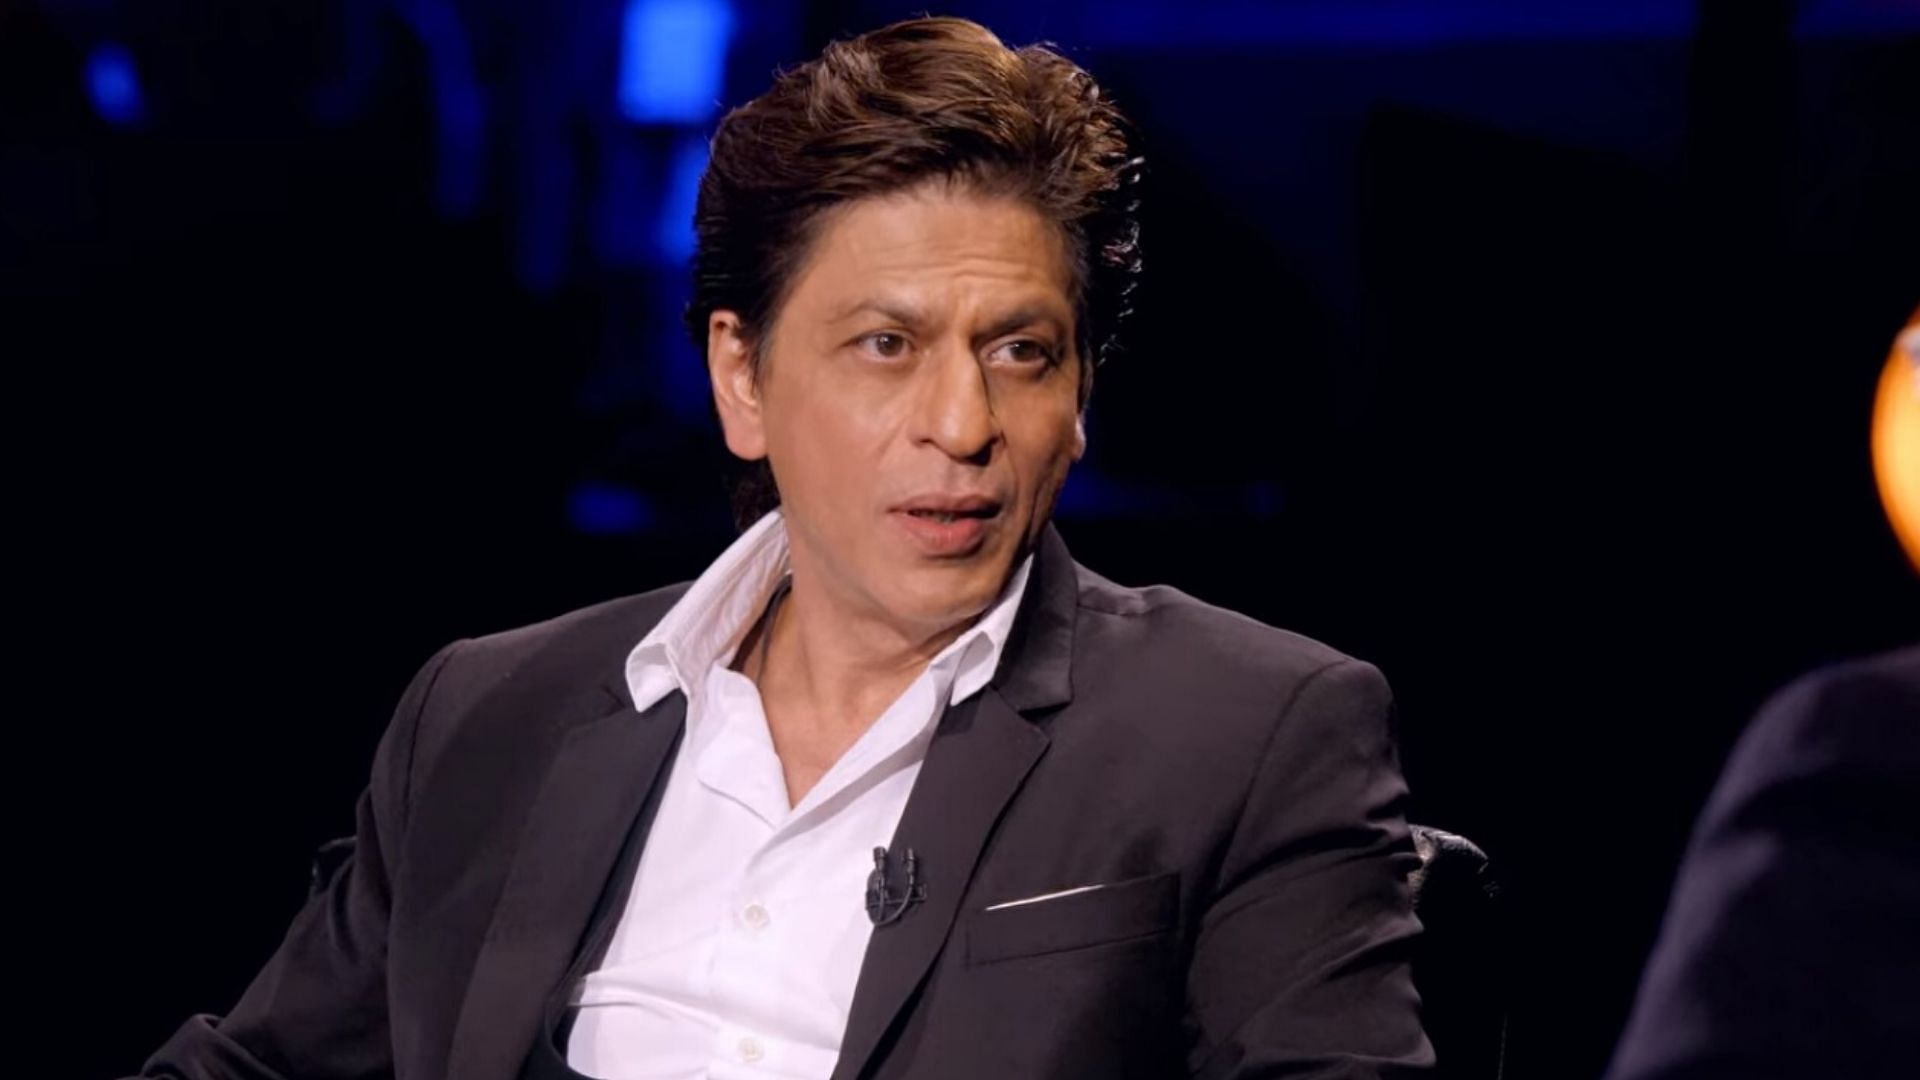 Shah Rukh Khan in conversation with David Letterman.